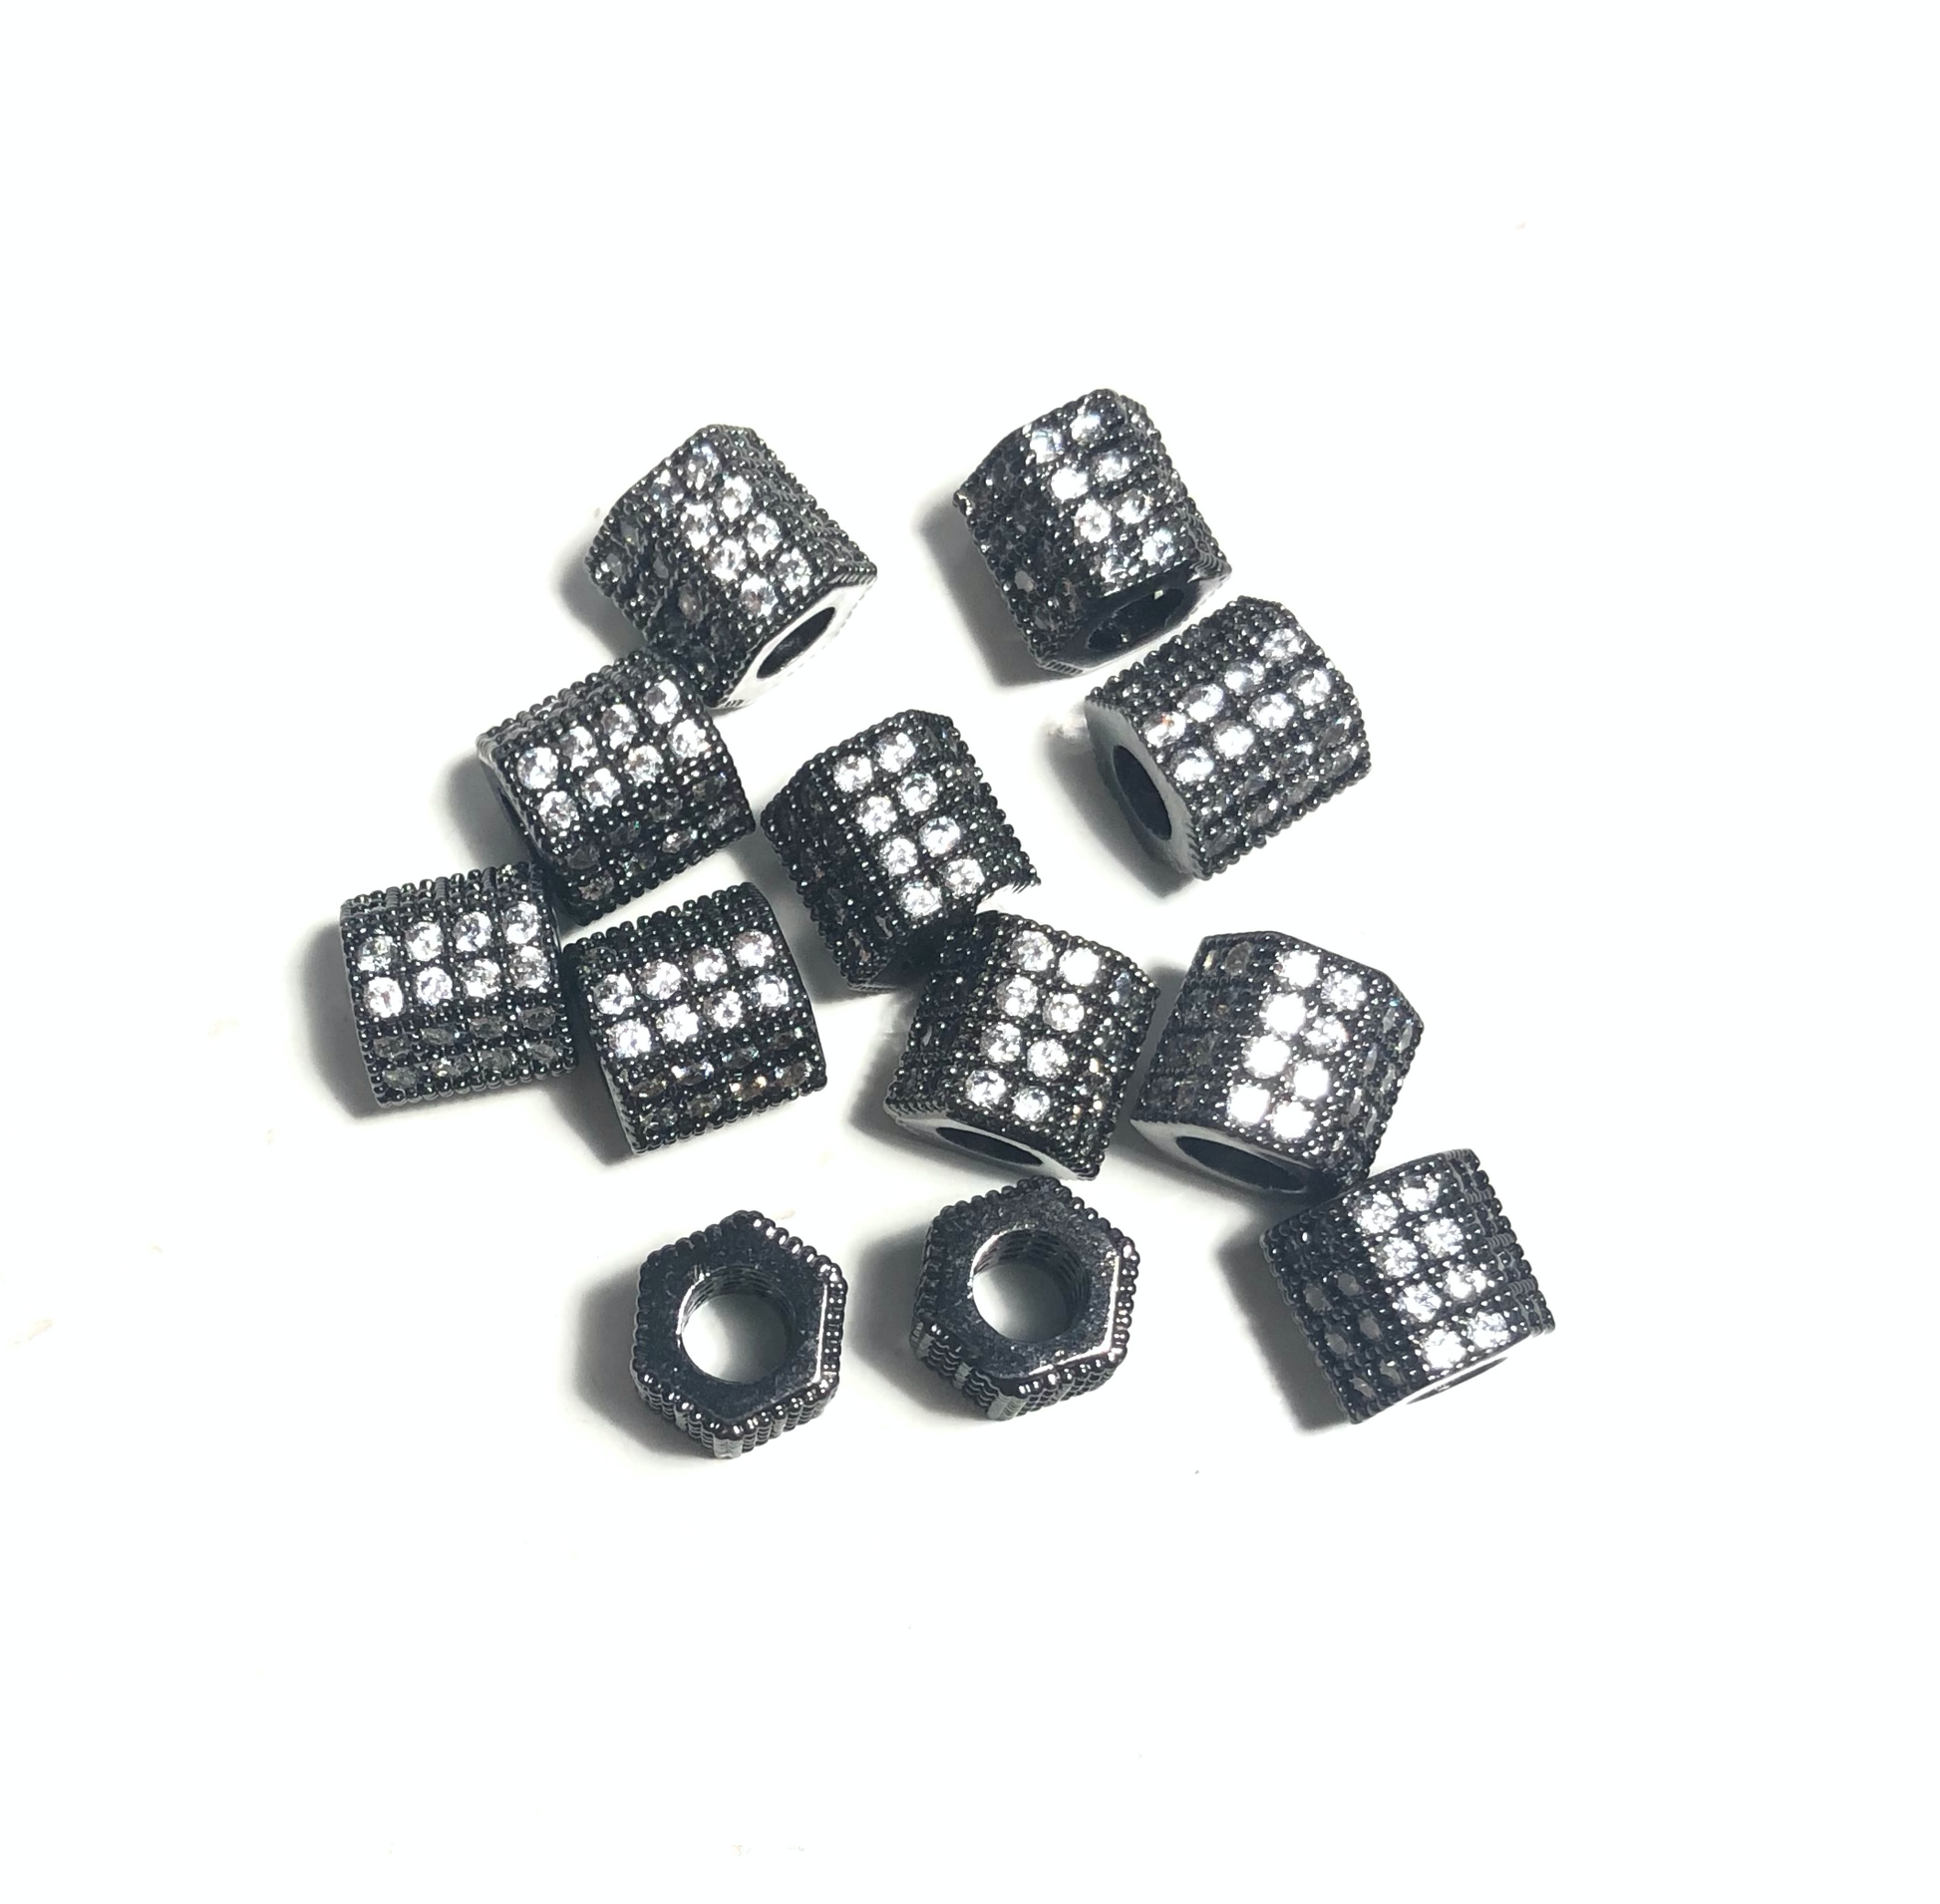 20pcs/lot 8*7mm Clear CZ Paved Hexagon Rondelle Spacers Black CZ Paved Spacers Rondelle Beads Charms Beads Beyond